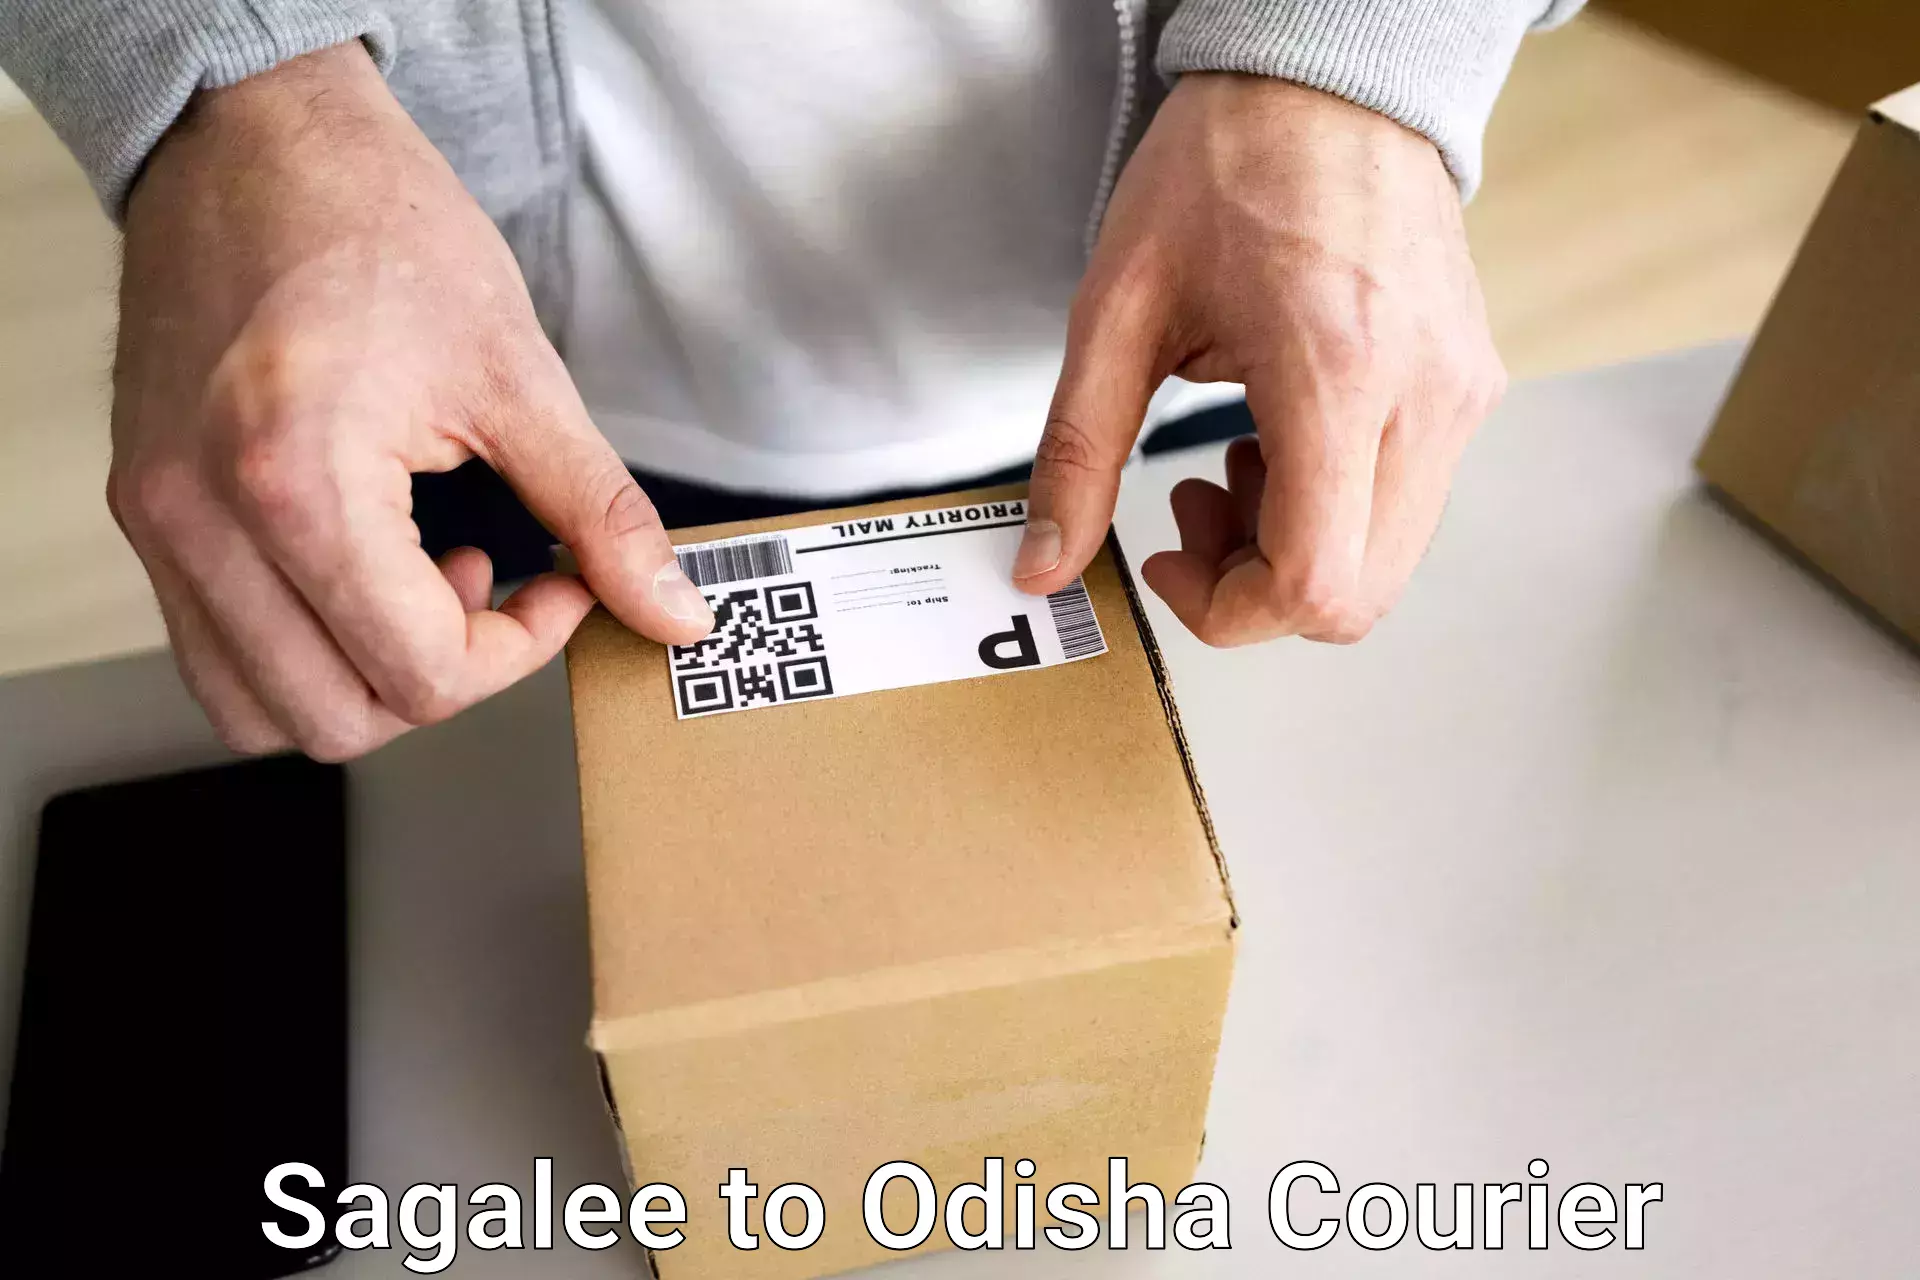 Baggage transport services in Sagalee to Ukhunda